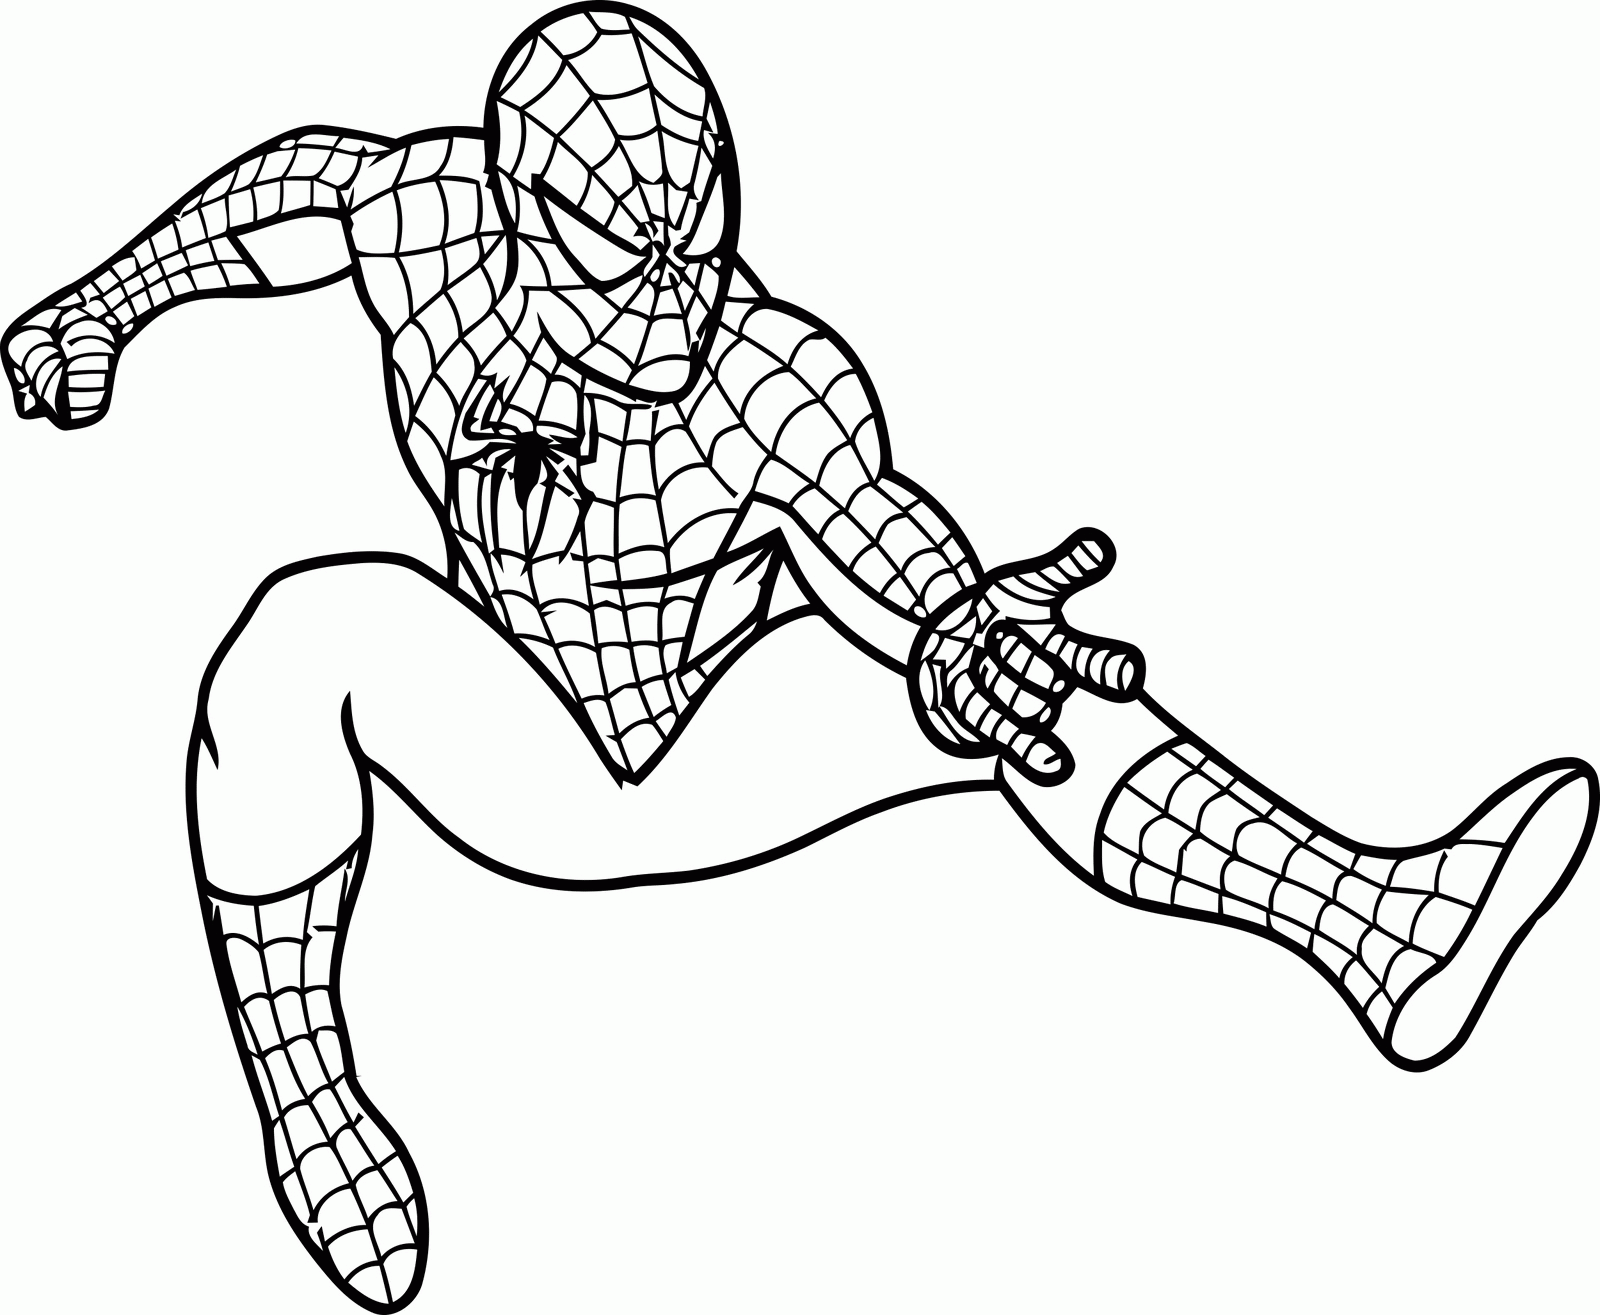 Related Spiderman Coloring Pages item-13065, Spiderman Coloring ...